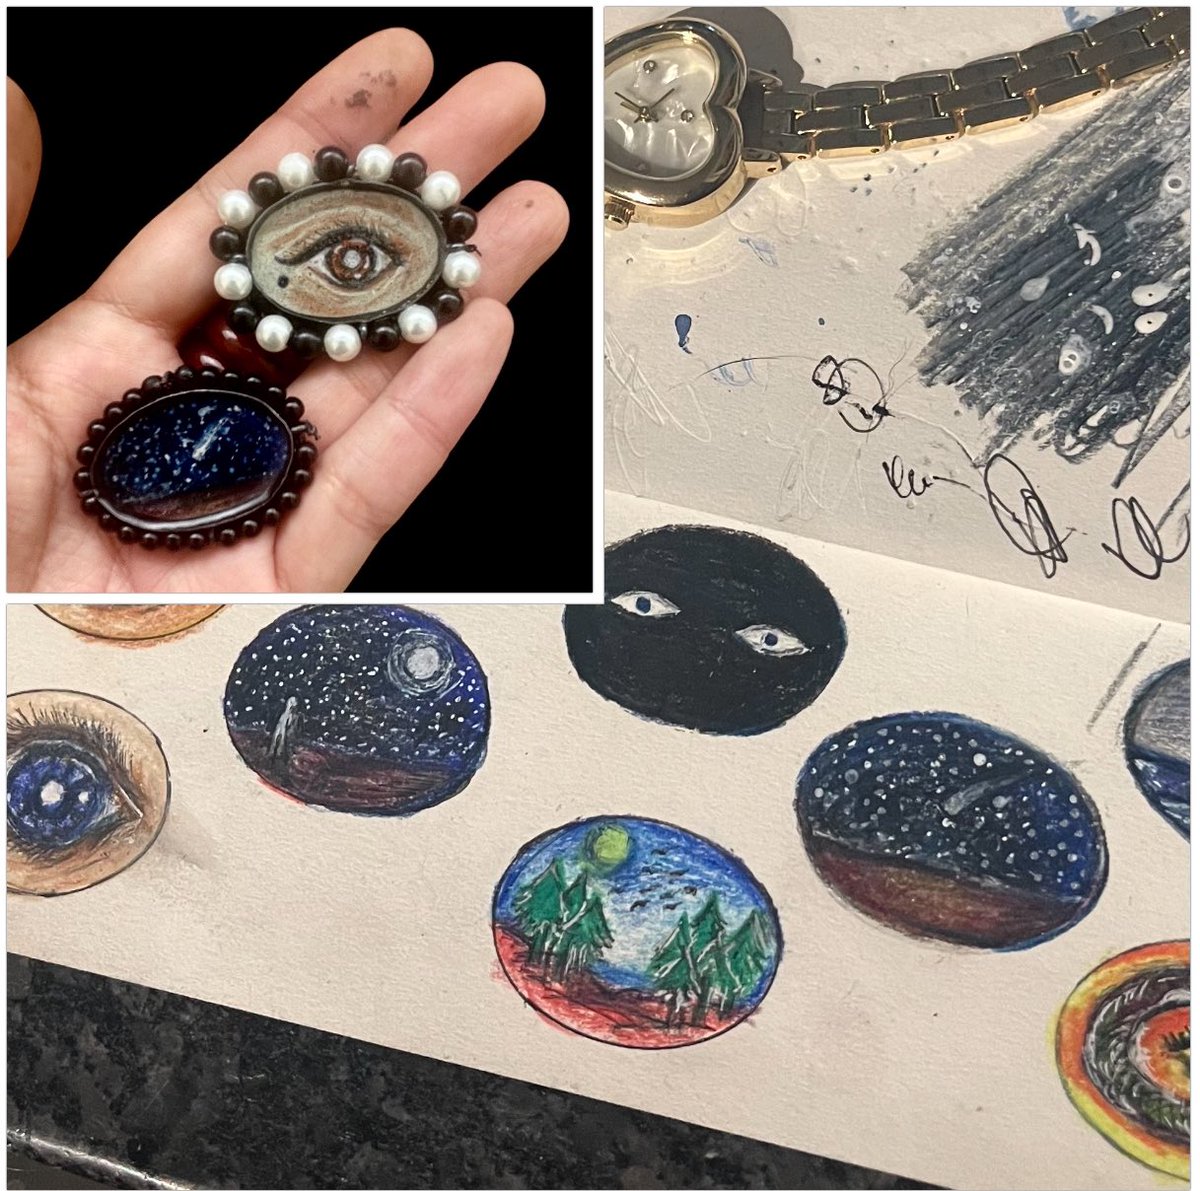 I’ve been experimenting the last couple of days. Created these small pendants with tiny prismacolor and watercolor drawings that I bezeled in silver then sealed in resin. Beads added and secured with small hooks soldered around the edges. Prototypes for now, but happy with the